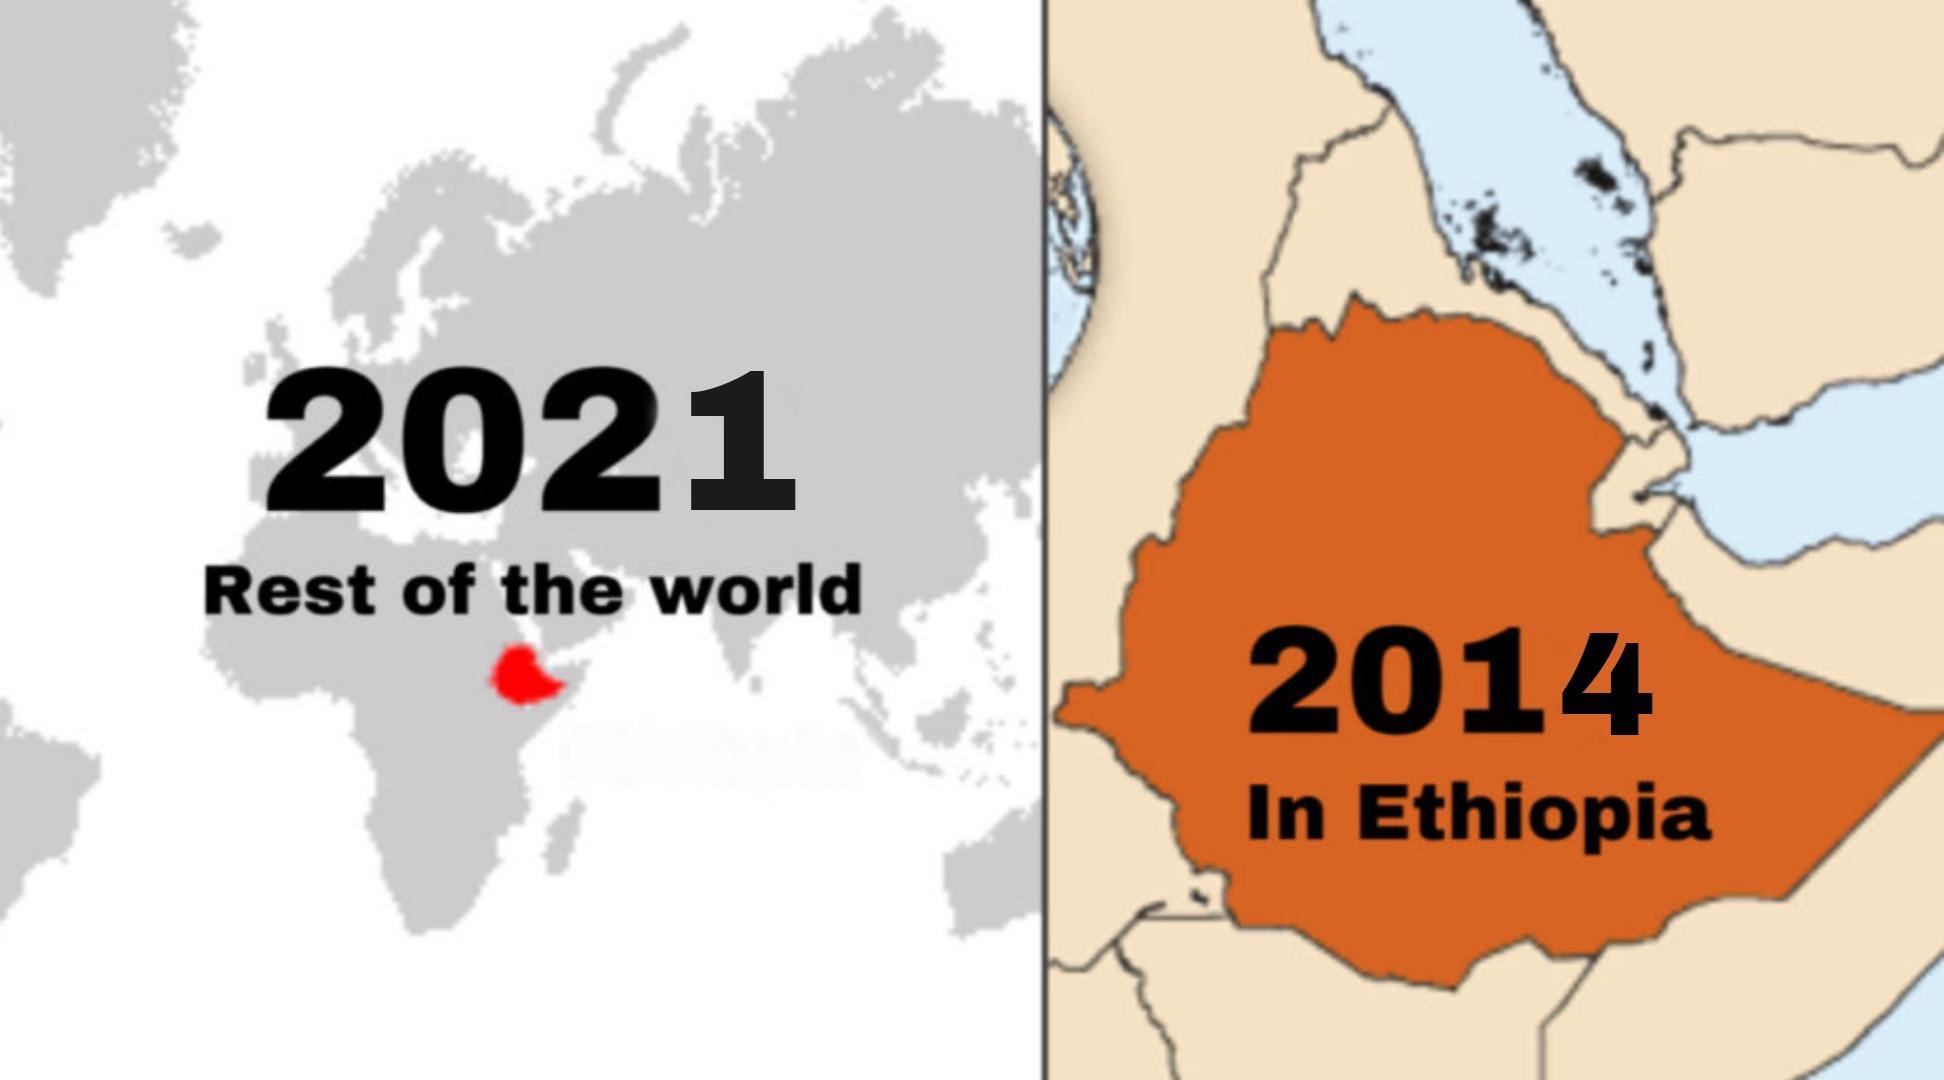 Ethiopia celebrates New Year in September. Seven to eight years behind rest of the world